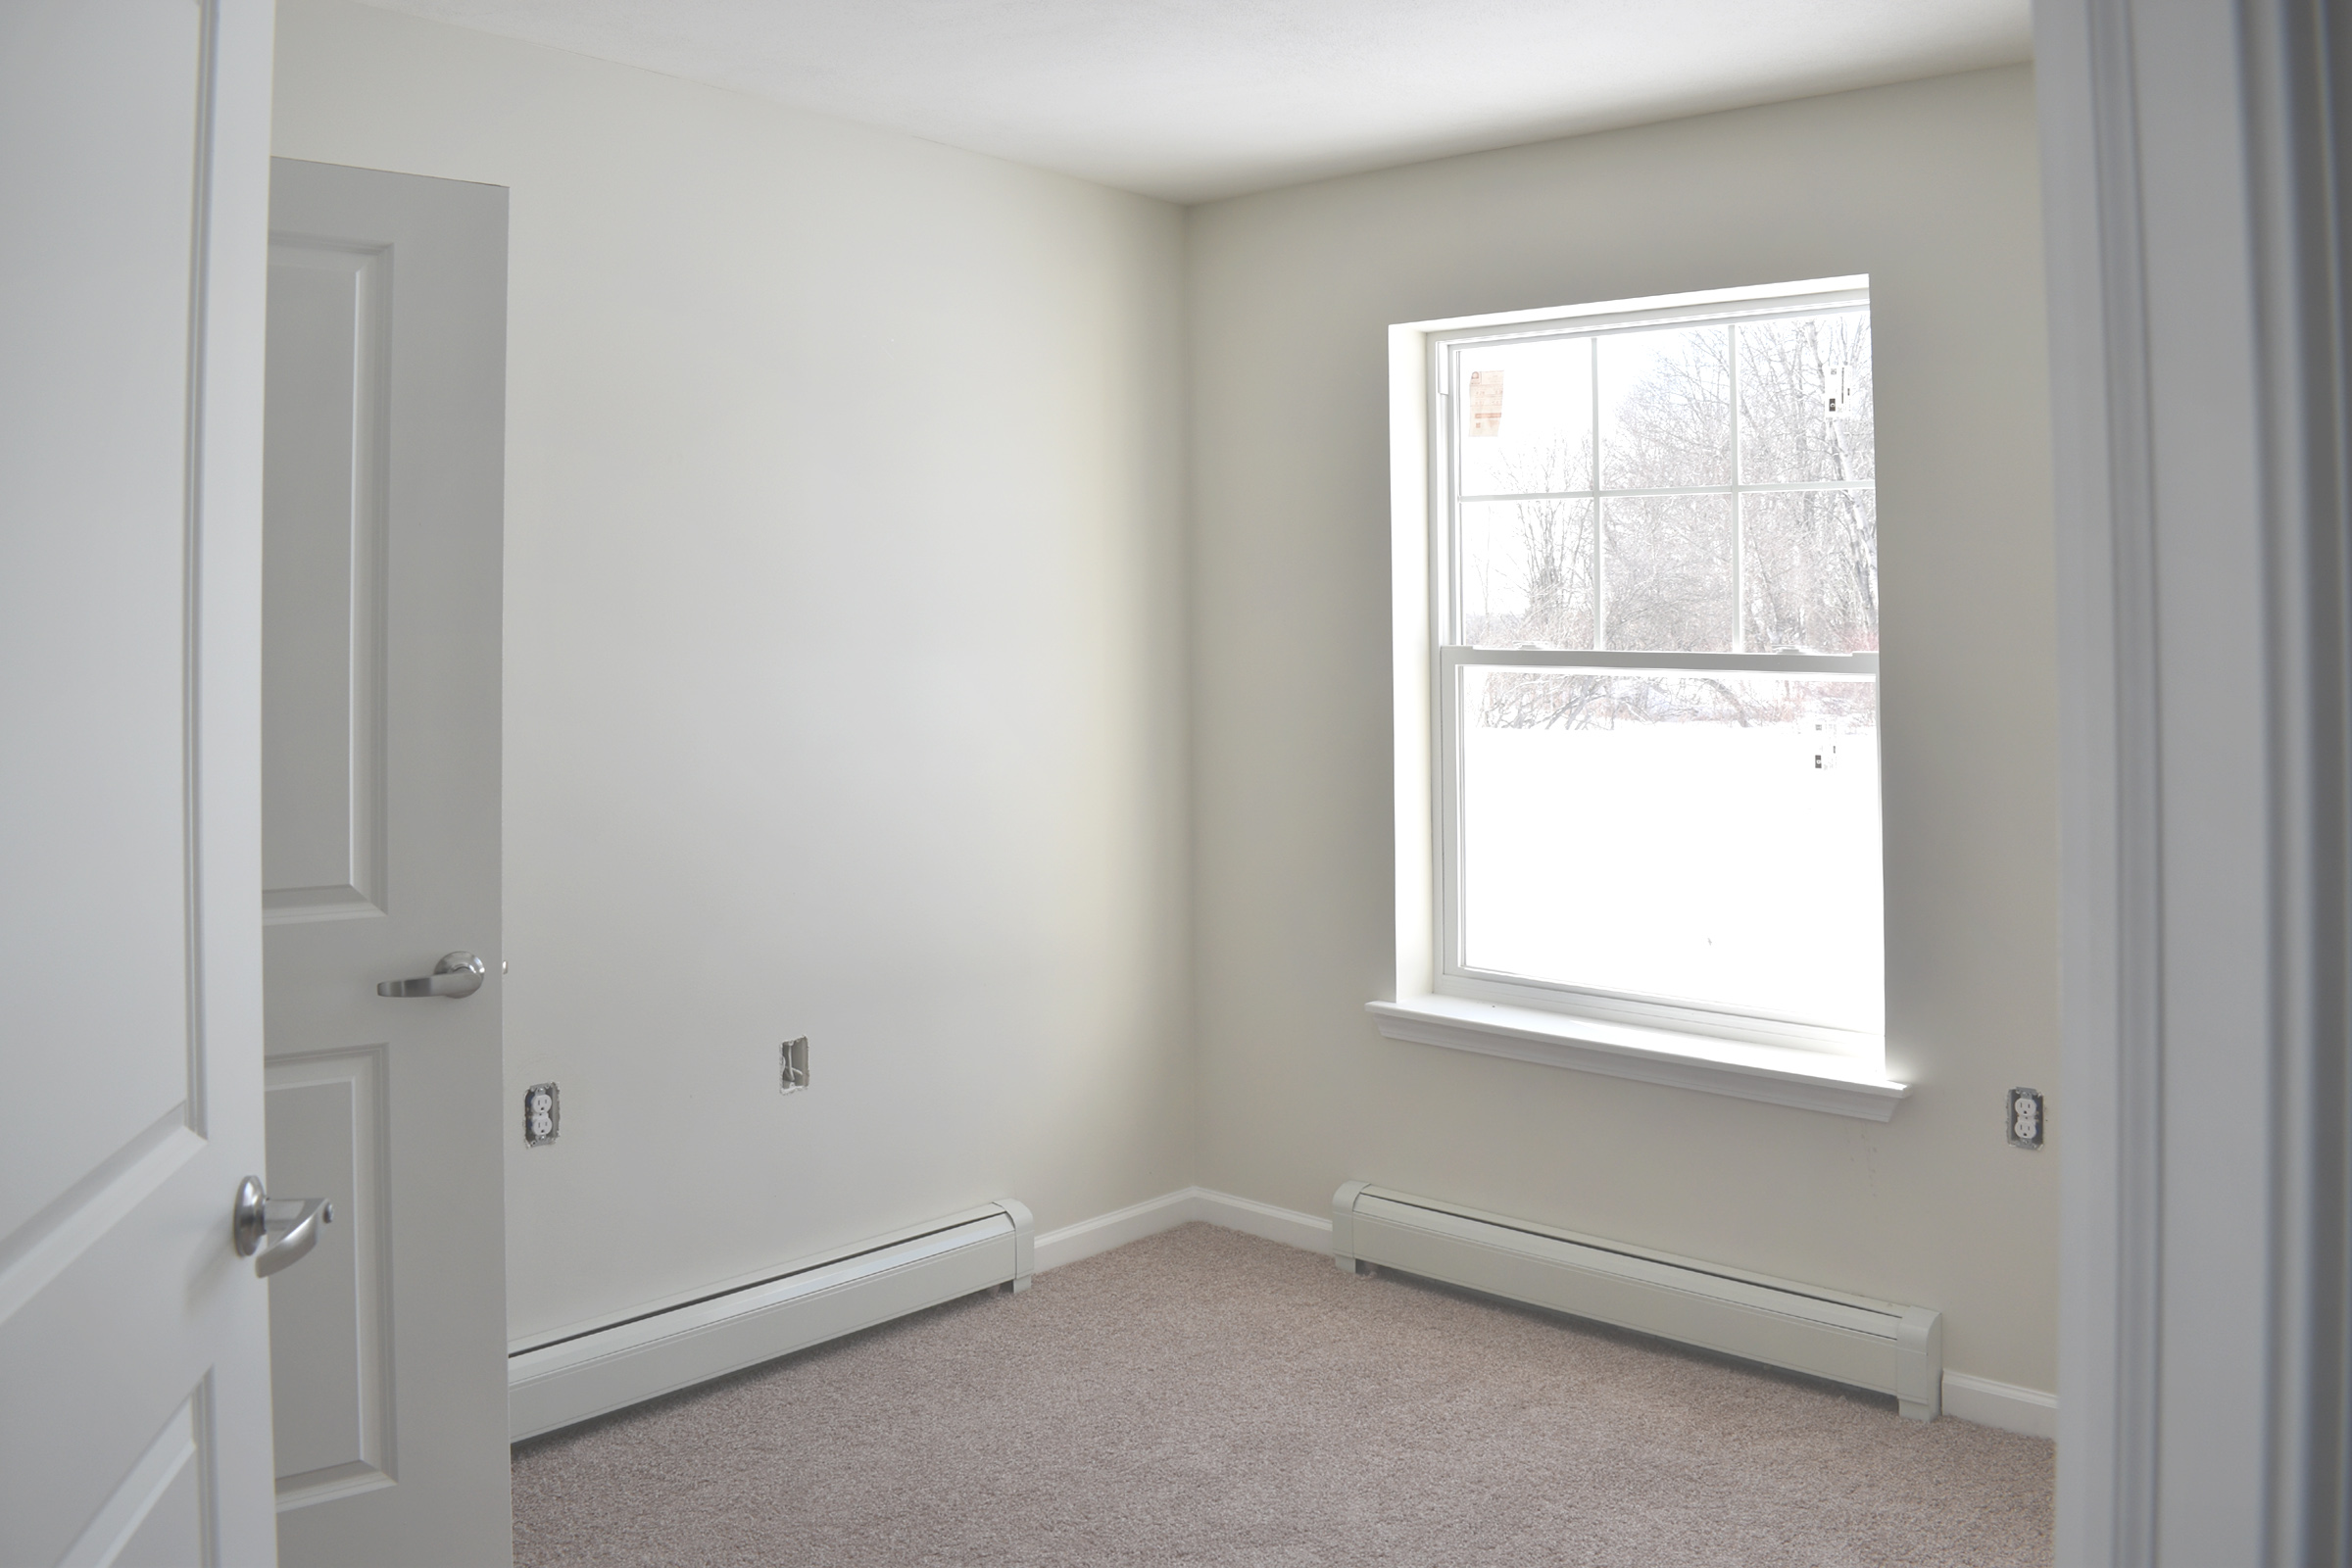 property management company client list syracuse ny bedroom number one image of selkirk townhome